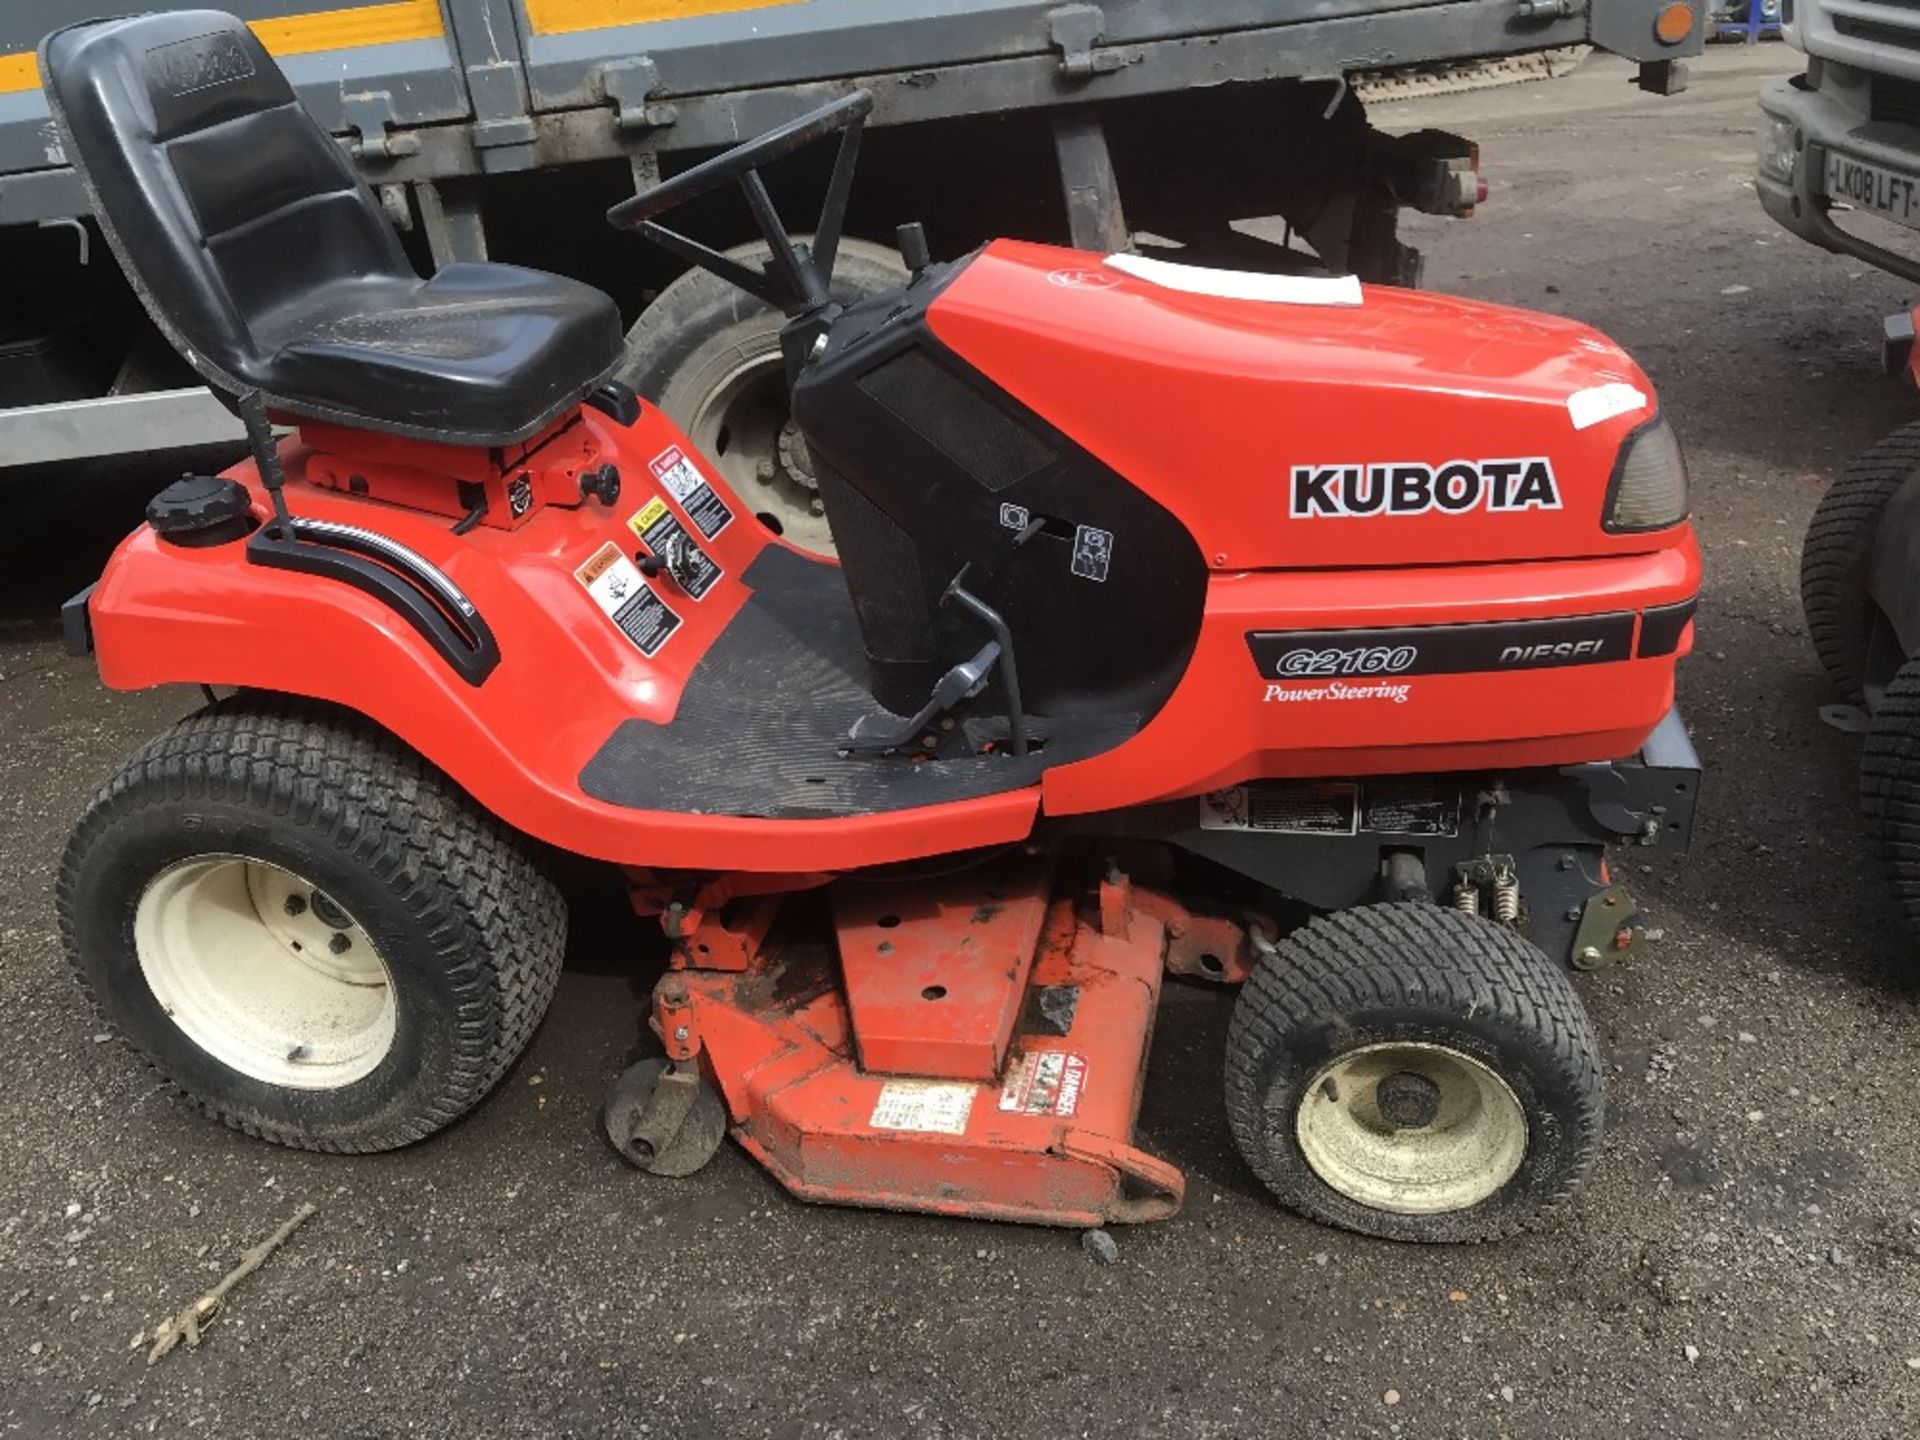 Kubota G2160 diesel mower tractor, reg. EU08 MZV SN: 12402 When tested was seen to run and drive